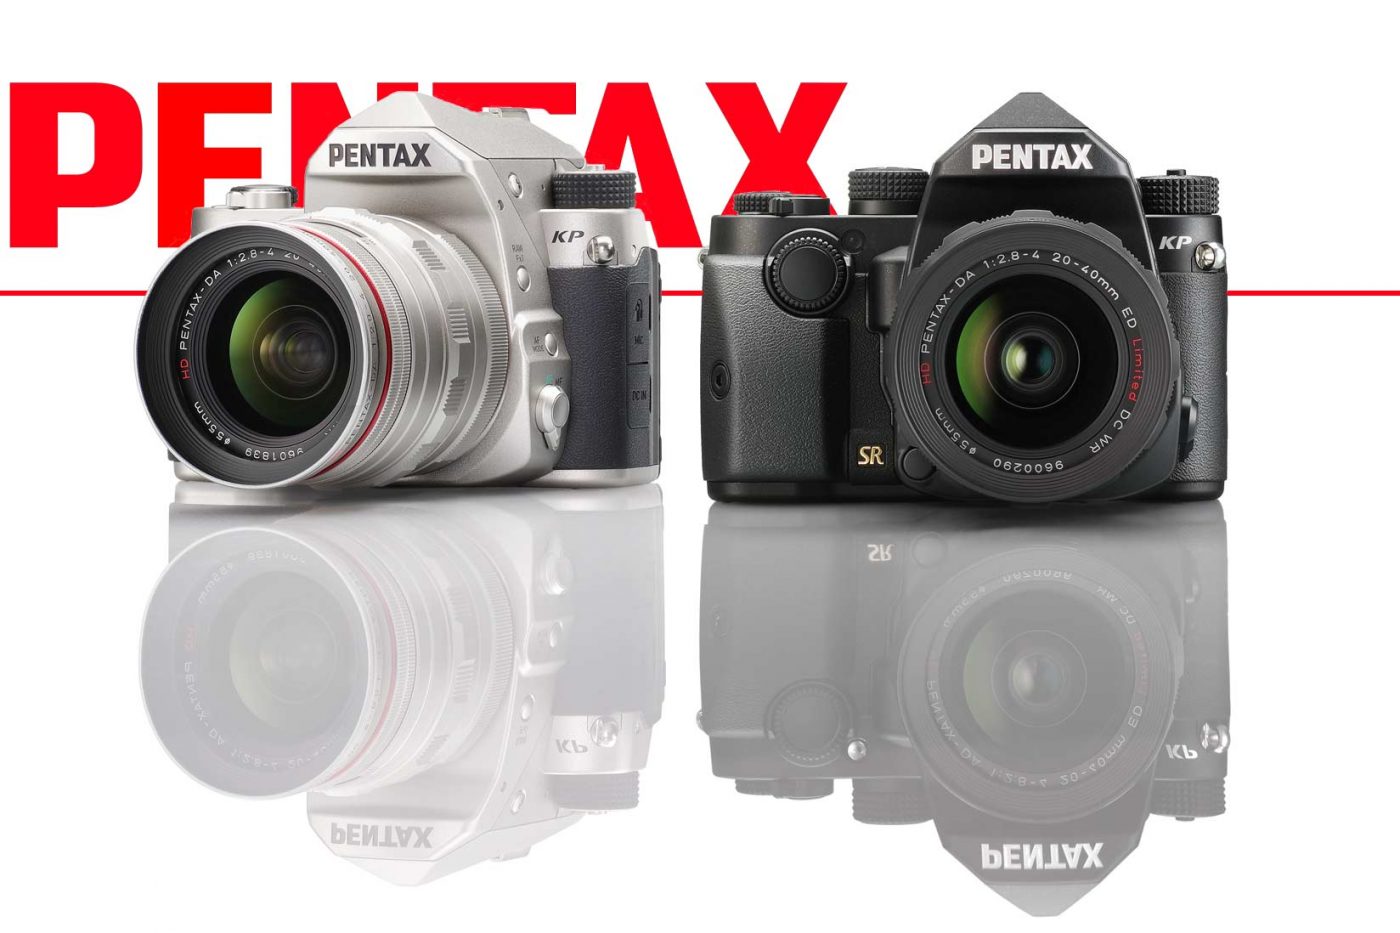 Pentax KP in silver and black